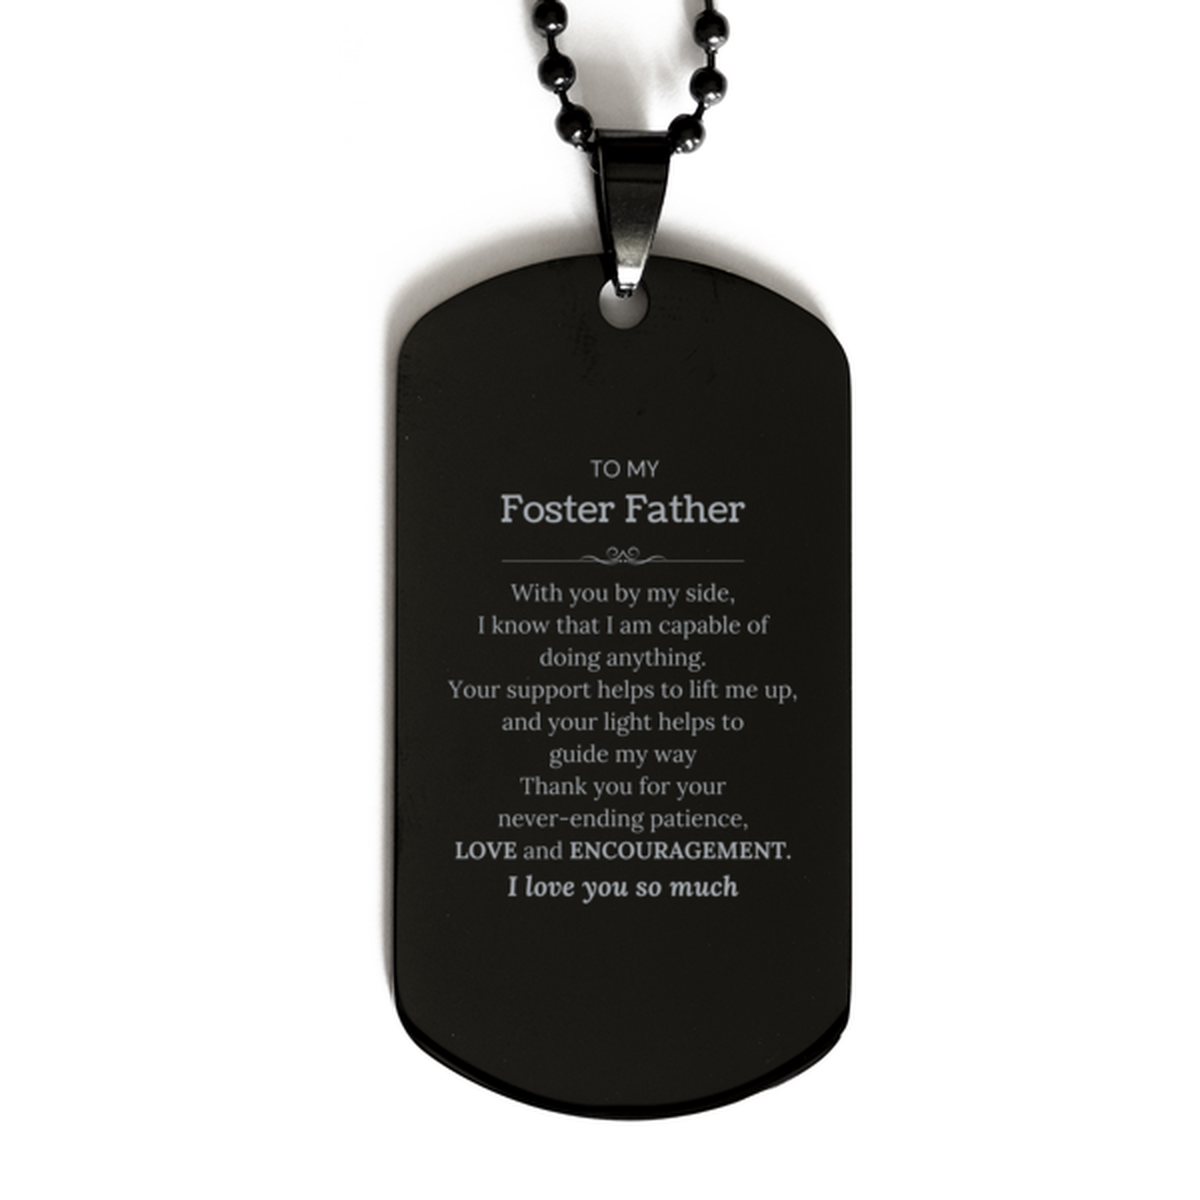 Appreciation Foster Father Black Dog Tag Gifts, To My Foster Father Birthday Christmas Wedding Keepsake Gifts for Foster Father With you by my side, I know that I am capable of doing anything. I love you so much